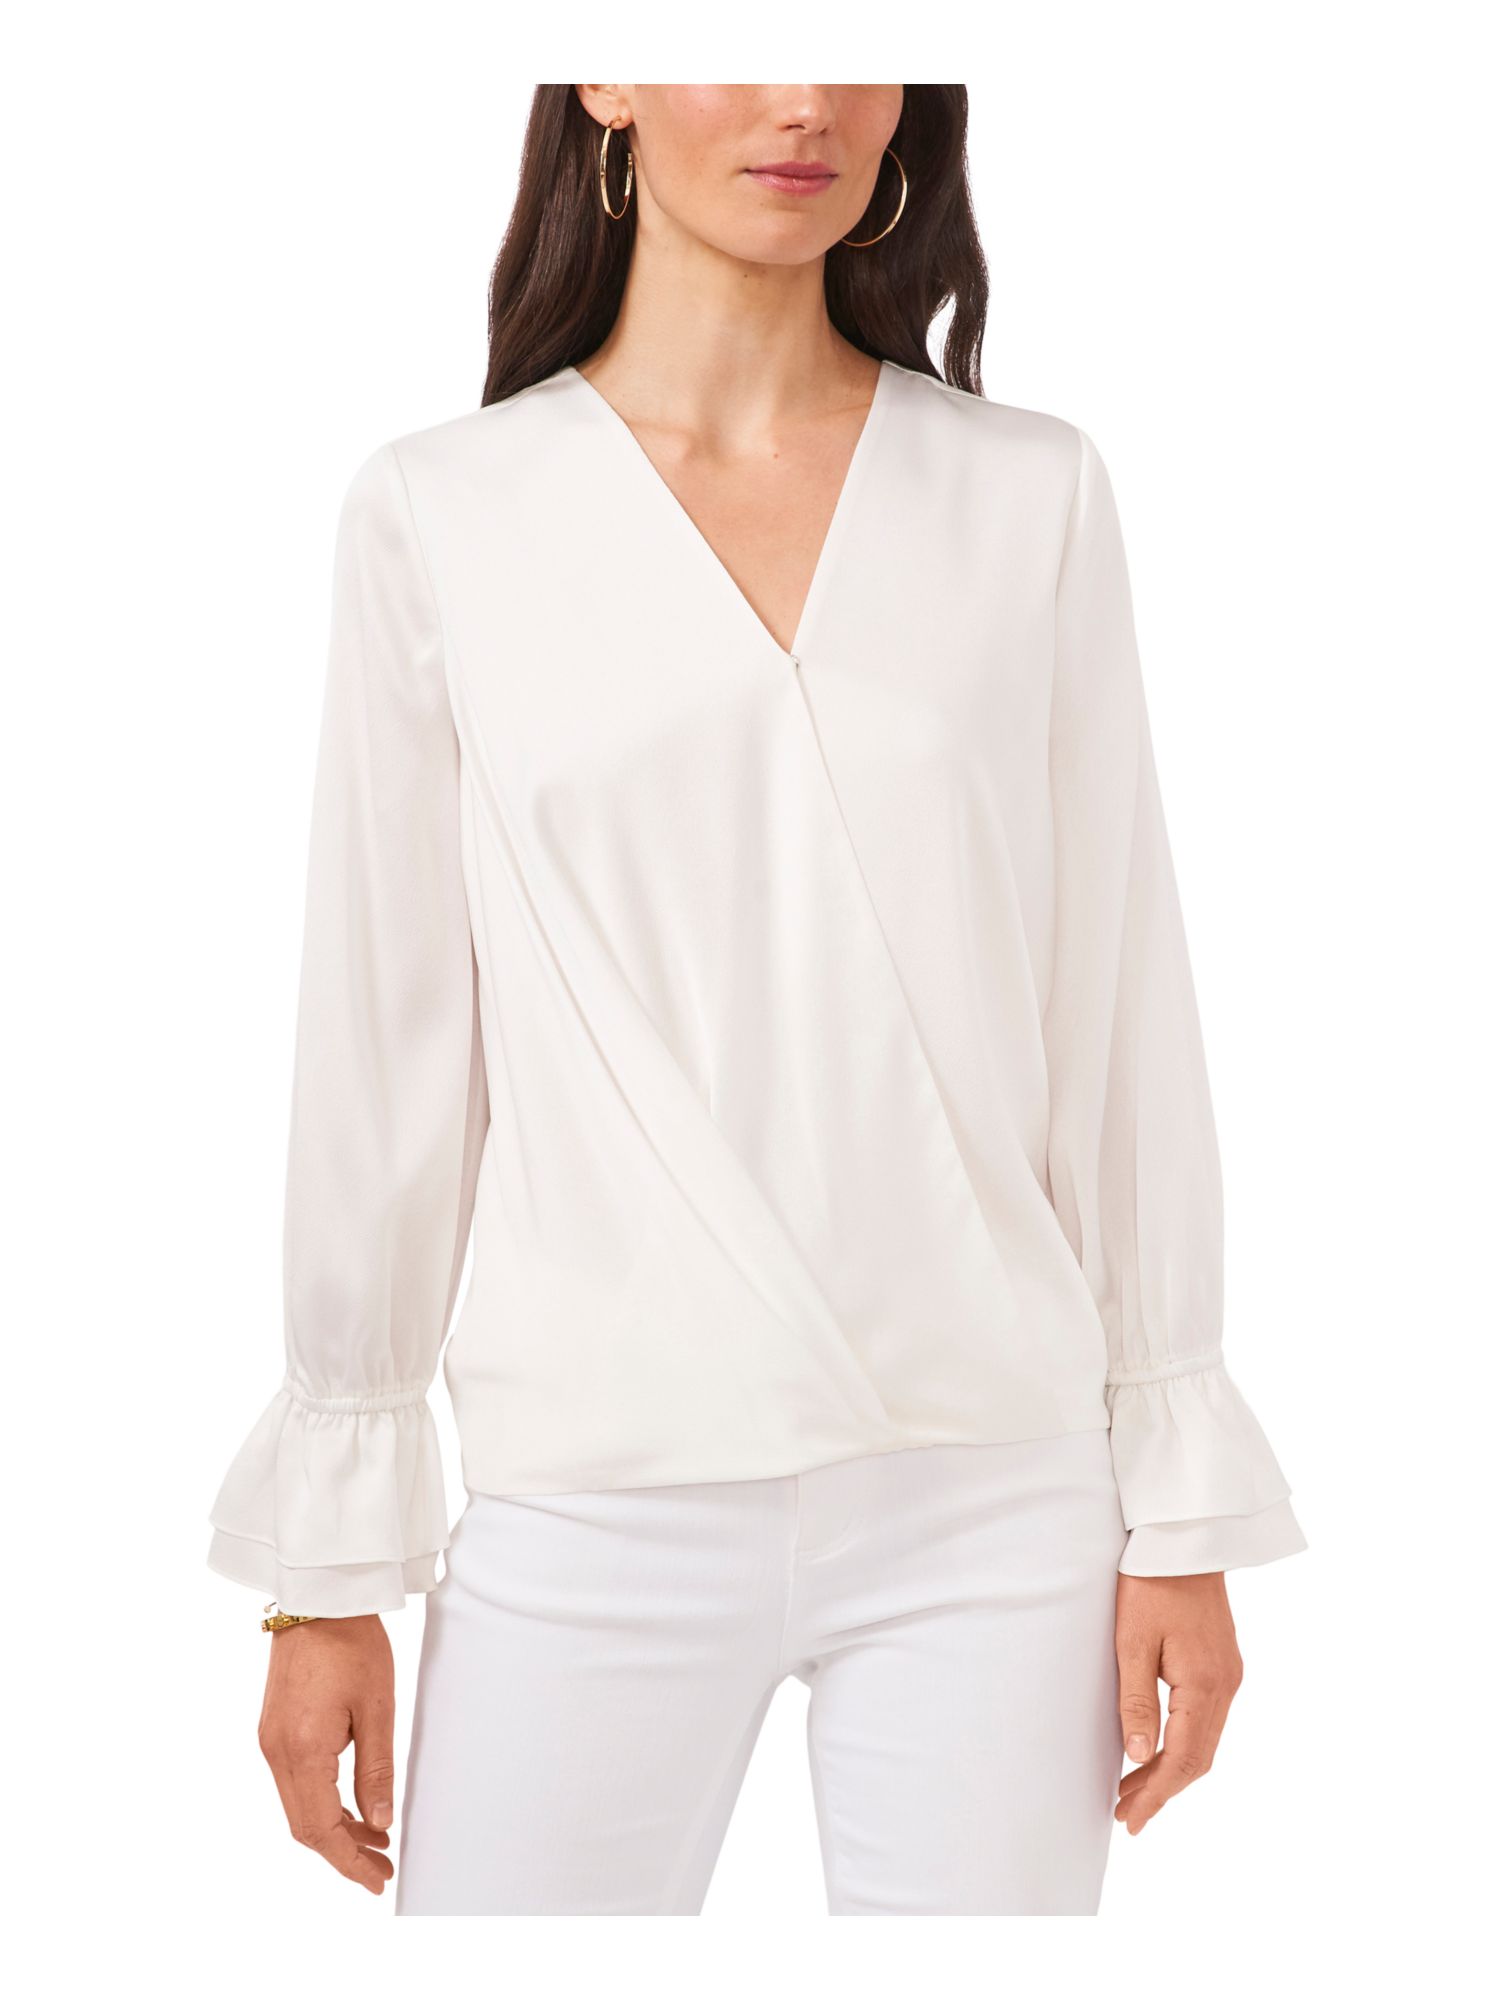 VINCE CAMUTO Womens White Pleated Ruffled-cuff Step Hem Long Sleeve Surplice Neckline Wear To Work Faux Wrap Top S